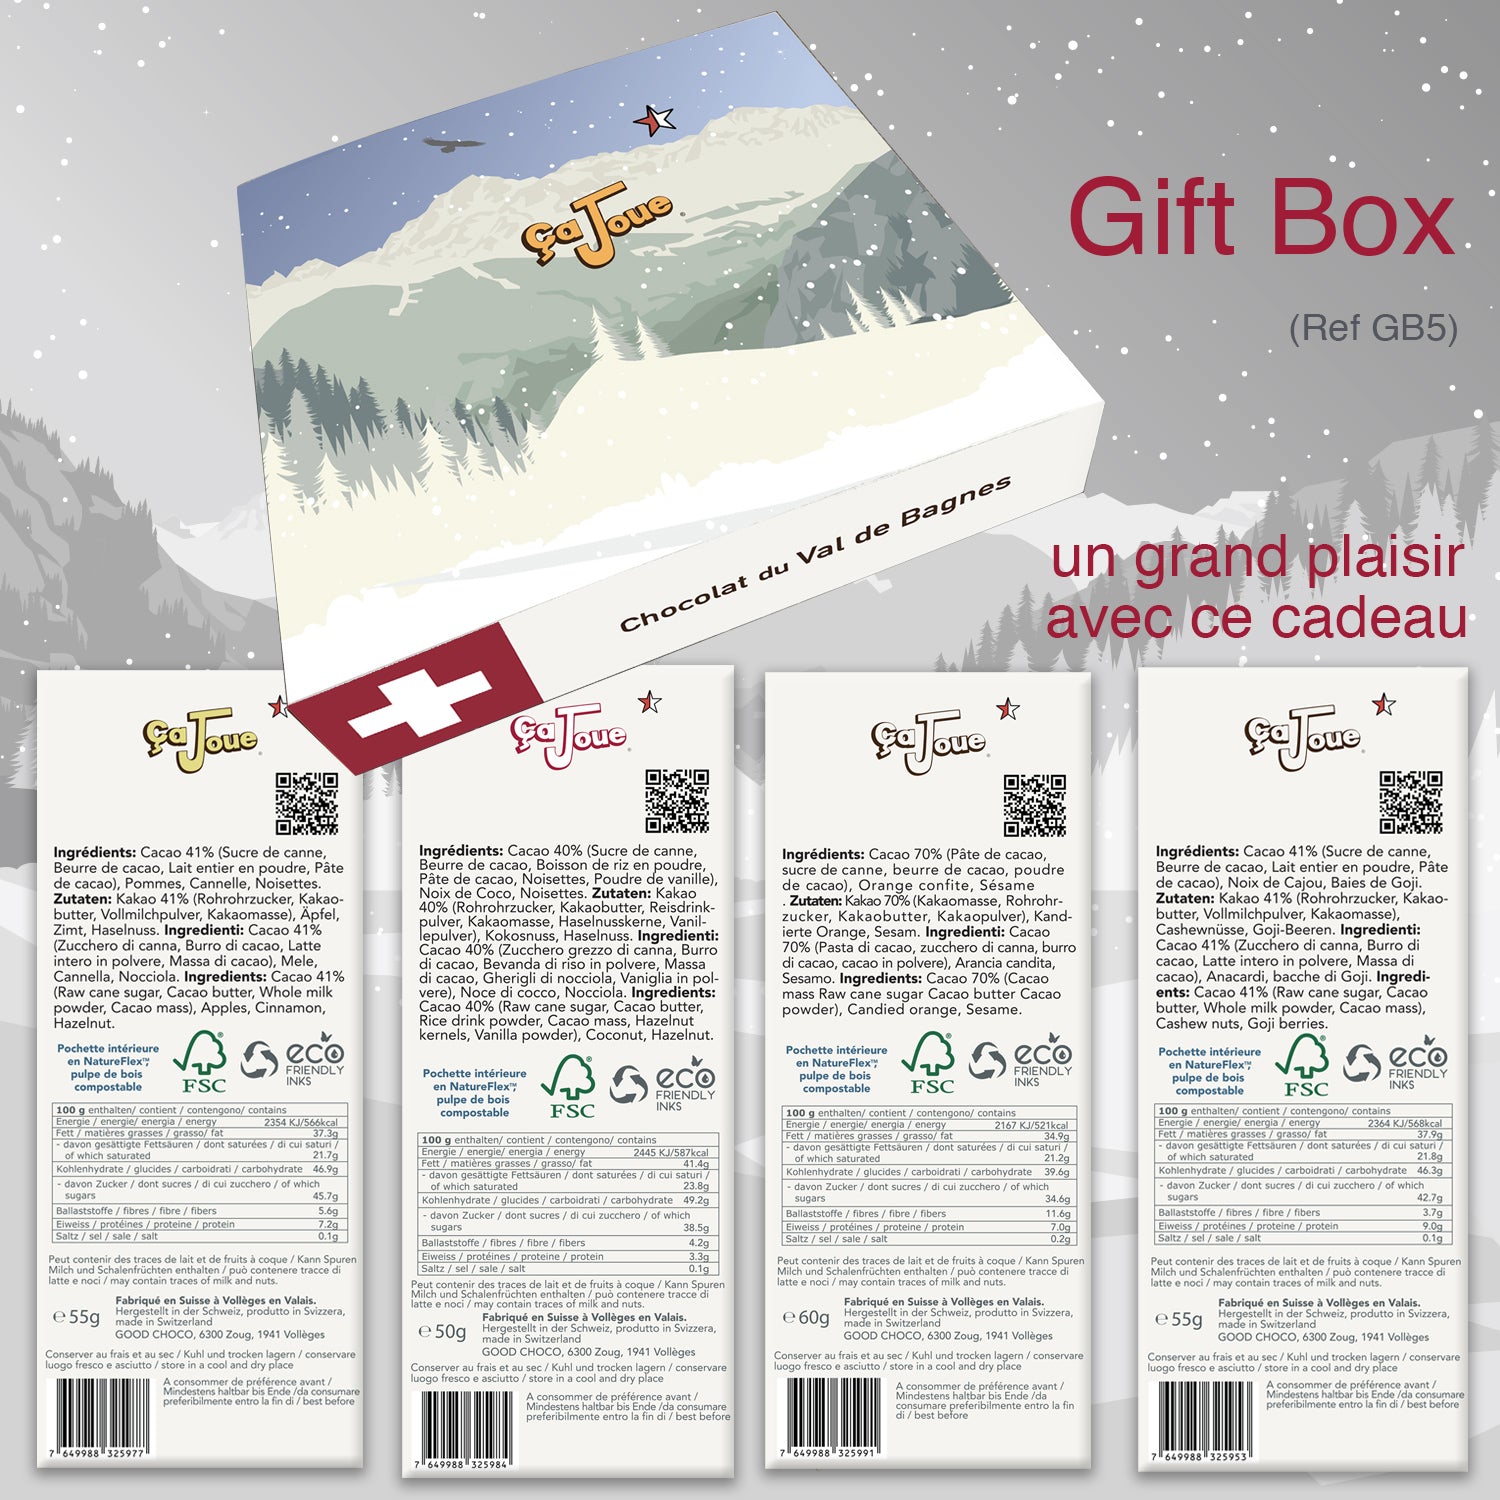 Gift Box (Ref GB5) Chocolate from Val de Bagnes